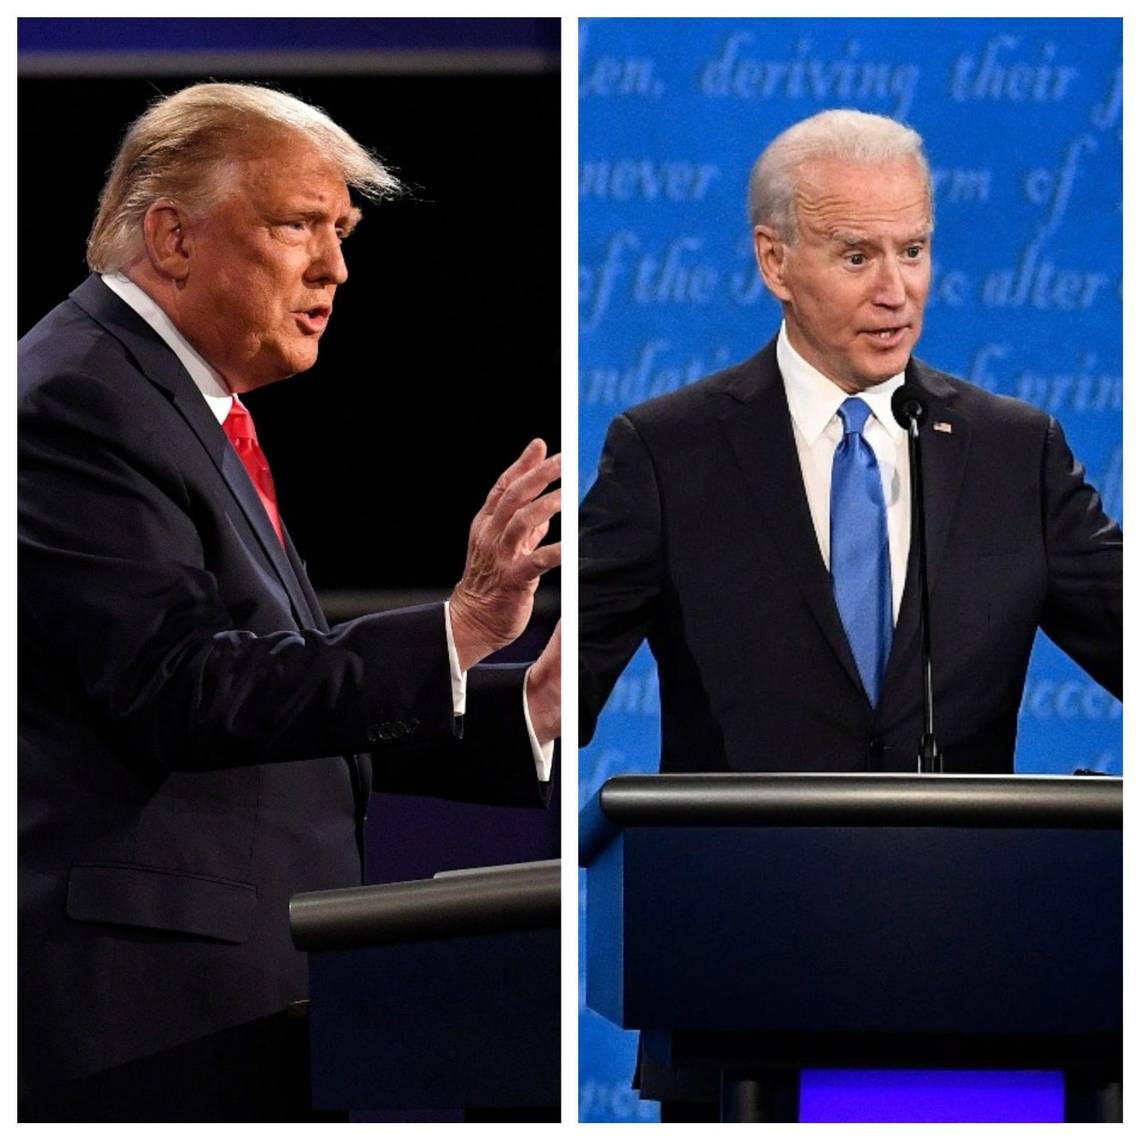 Andres Oppenheimer: Biden-Trump debate on immigration is pointless: U.S. jobs will keep luring immigrants| Opinion